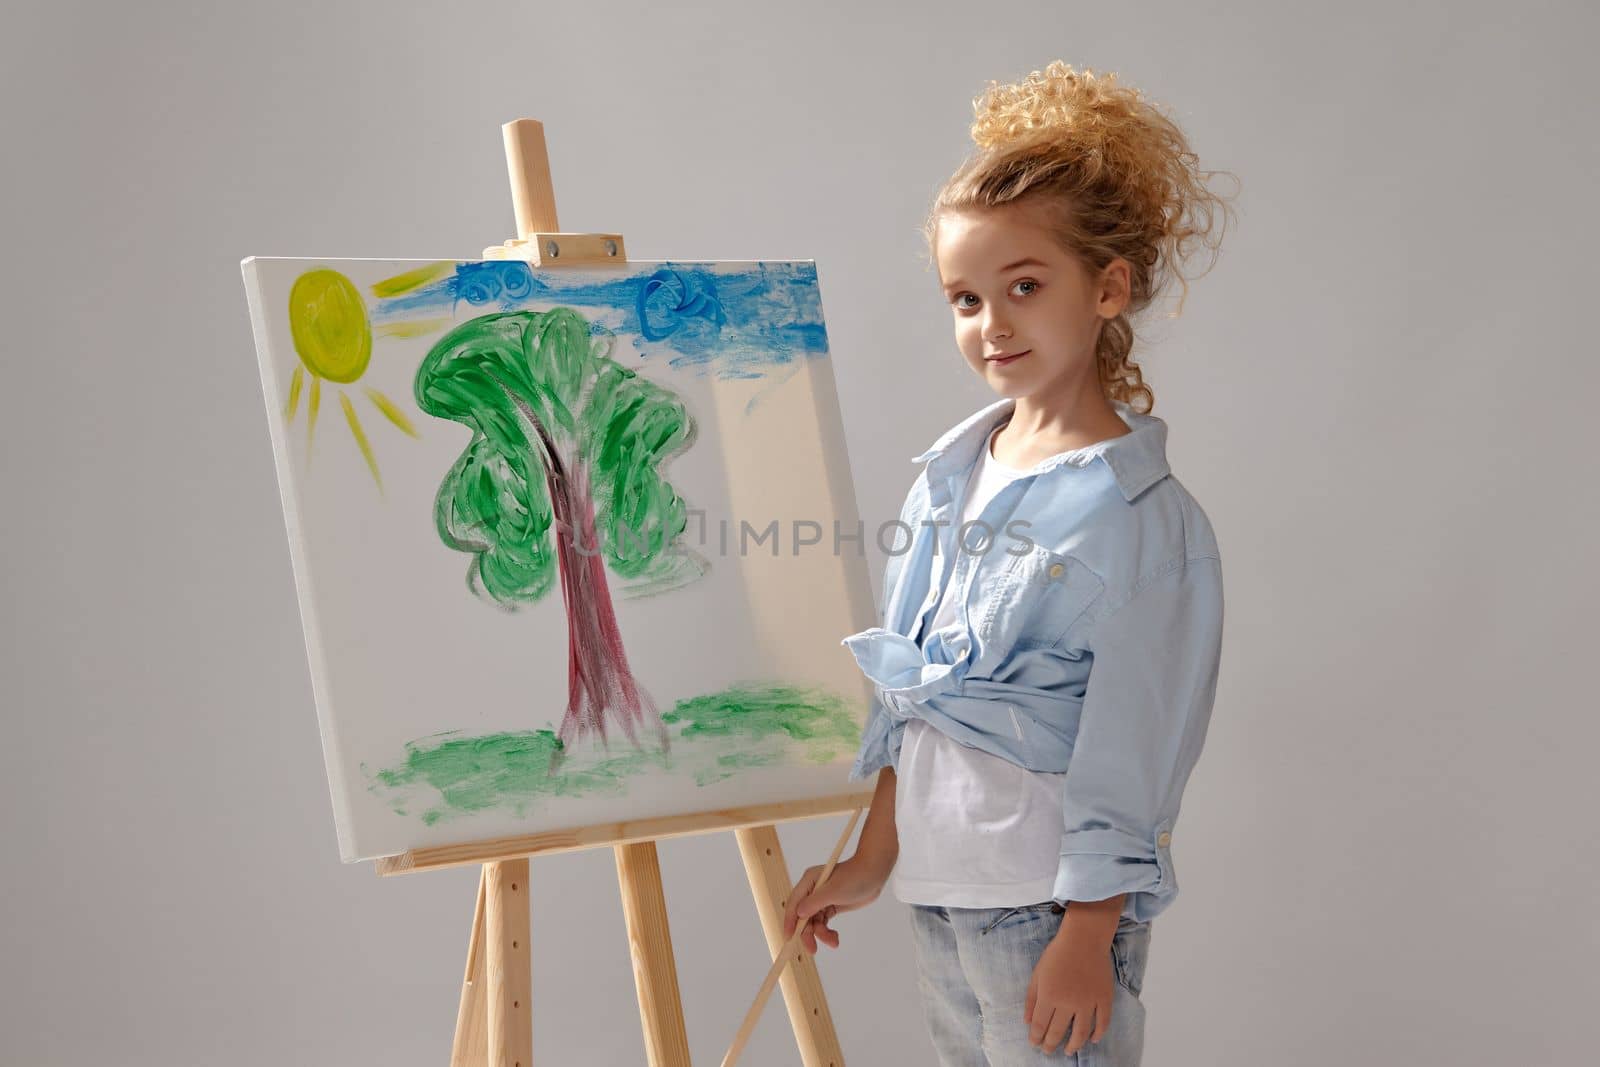 Charming school girl whith a curly blond hair, wearing in a blue shirt and white t-shirt is painting with a watercolor brush on an easel, looking at the camera and standing on a gray background.